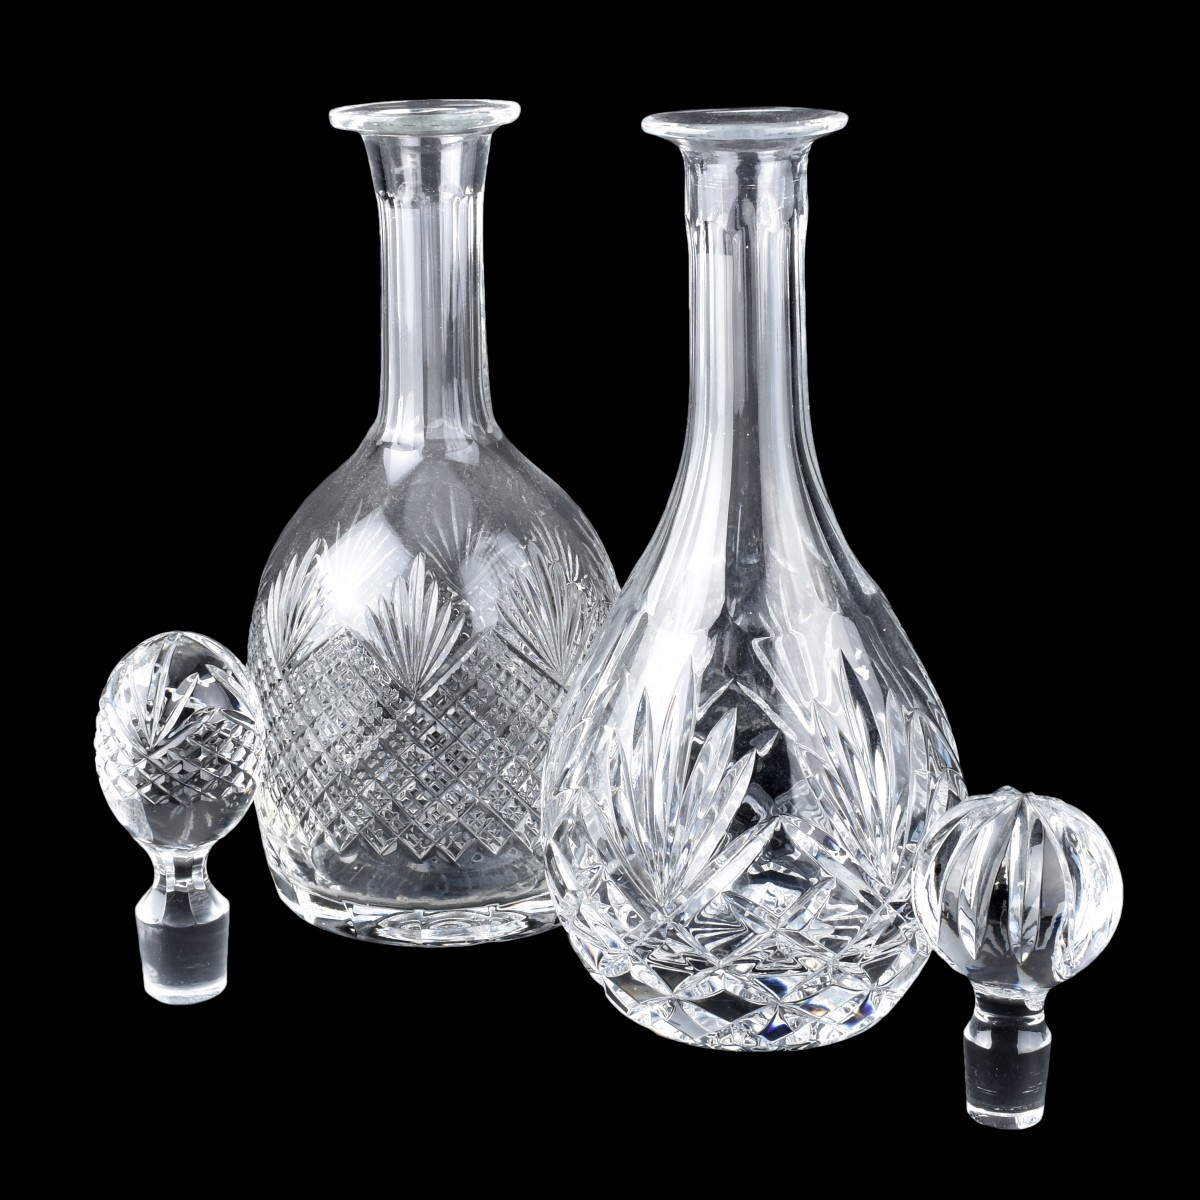 Two (2) Vintage Crystal Decanters